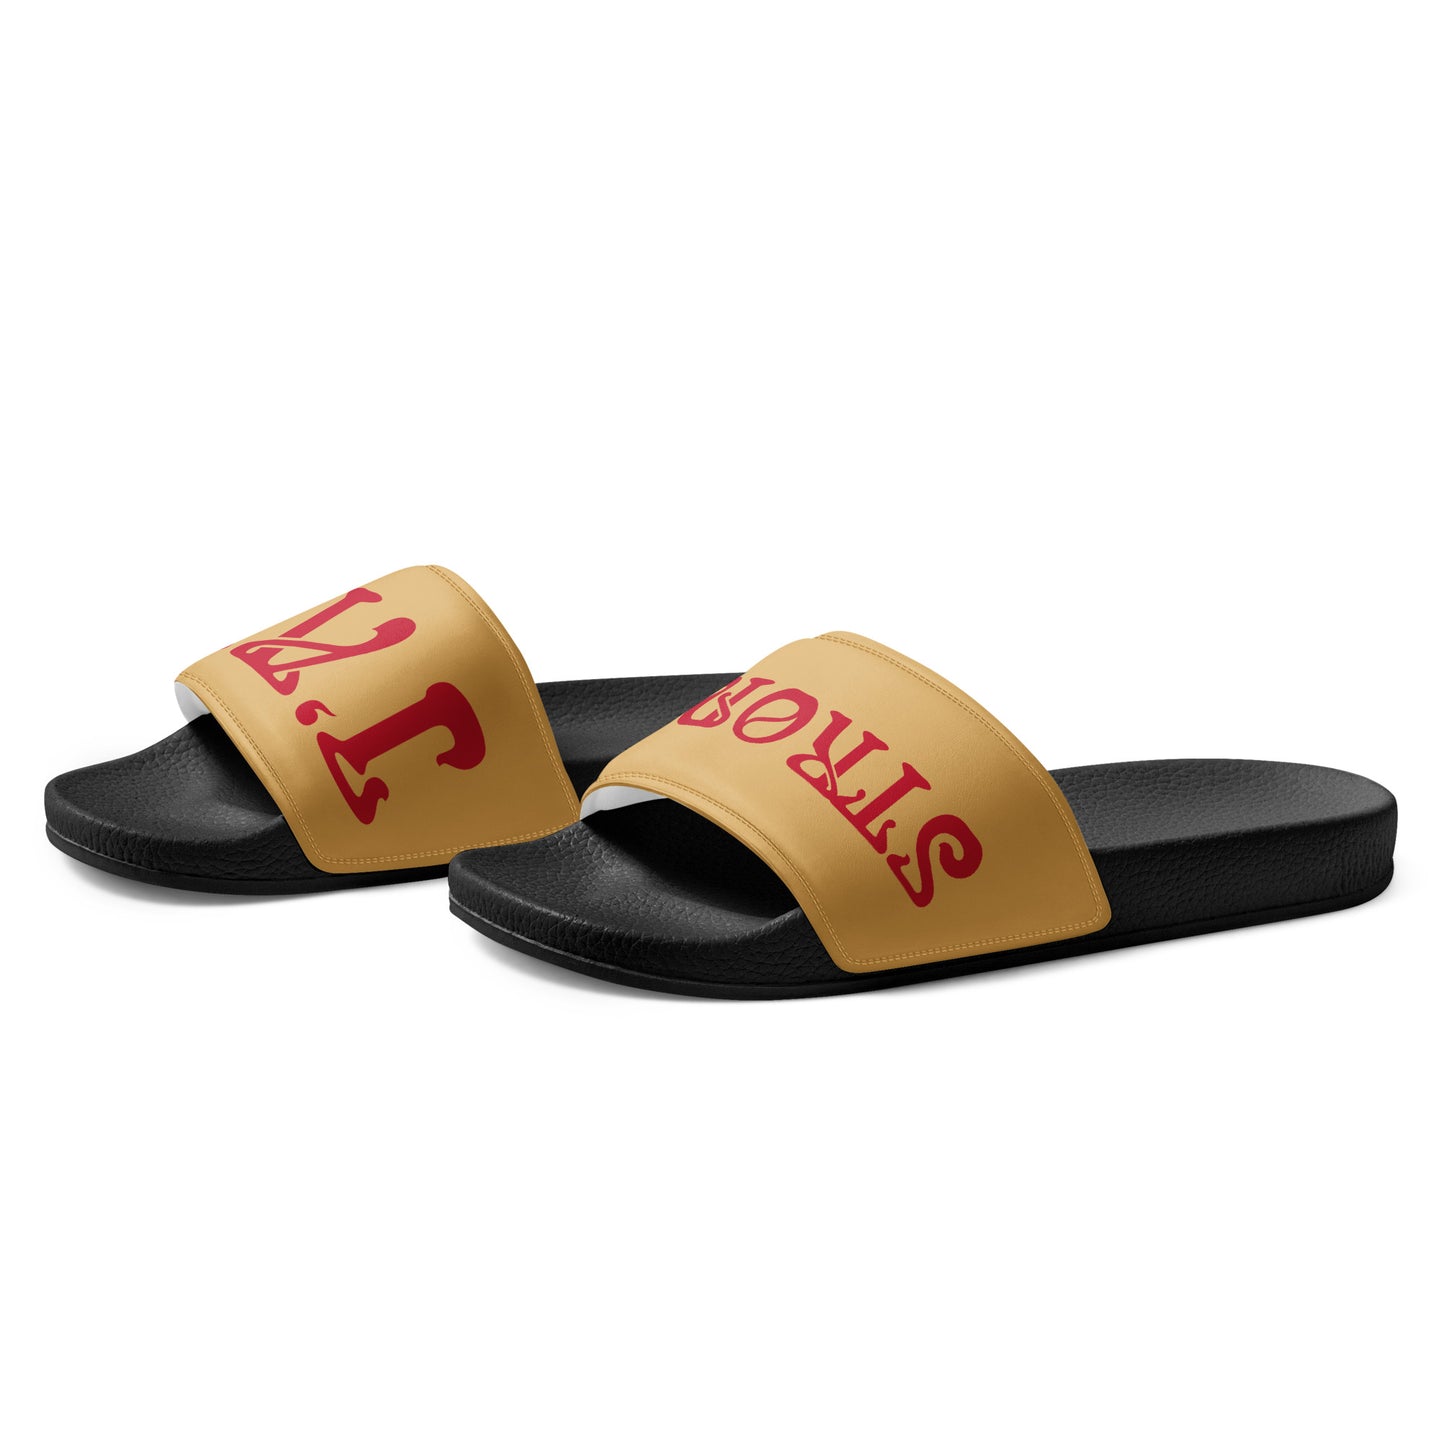 “I’AM STRONG” Fawn Women's Slides W/Red Font